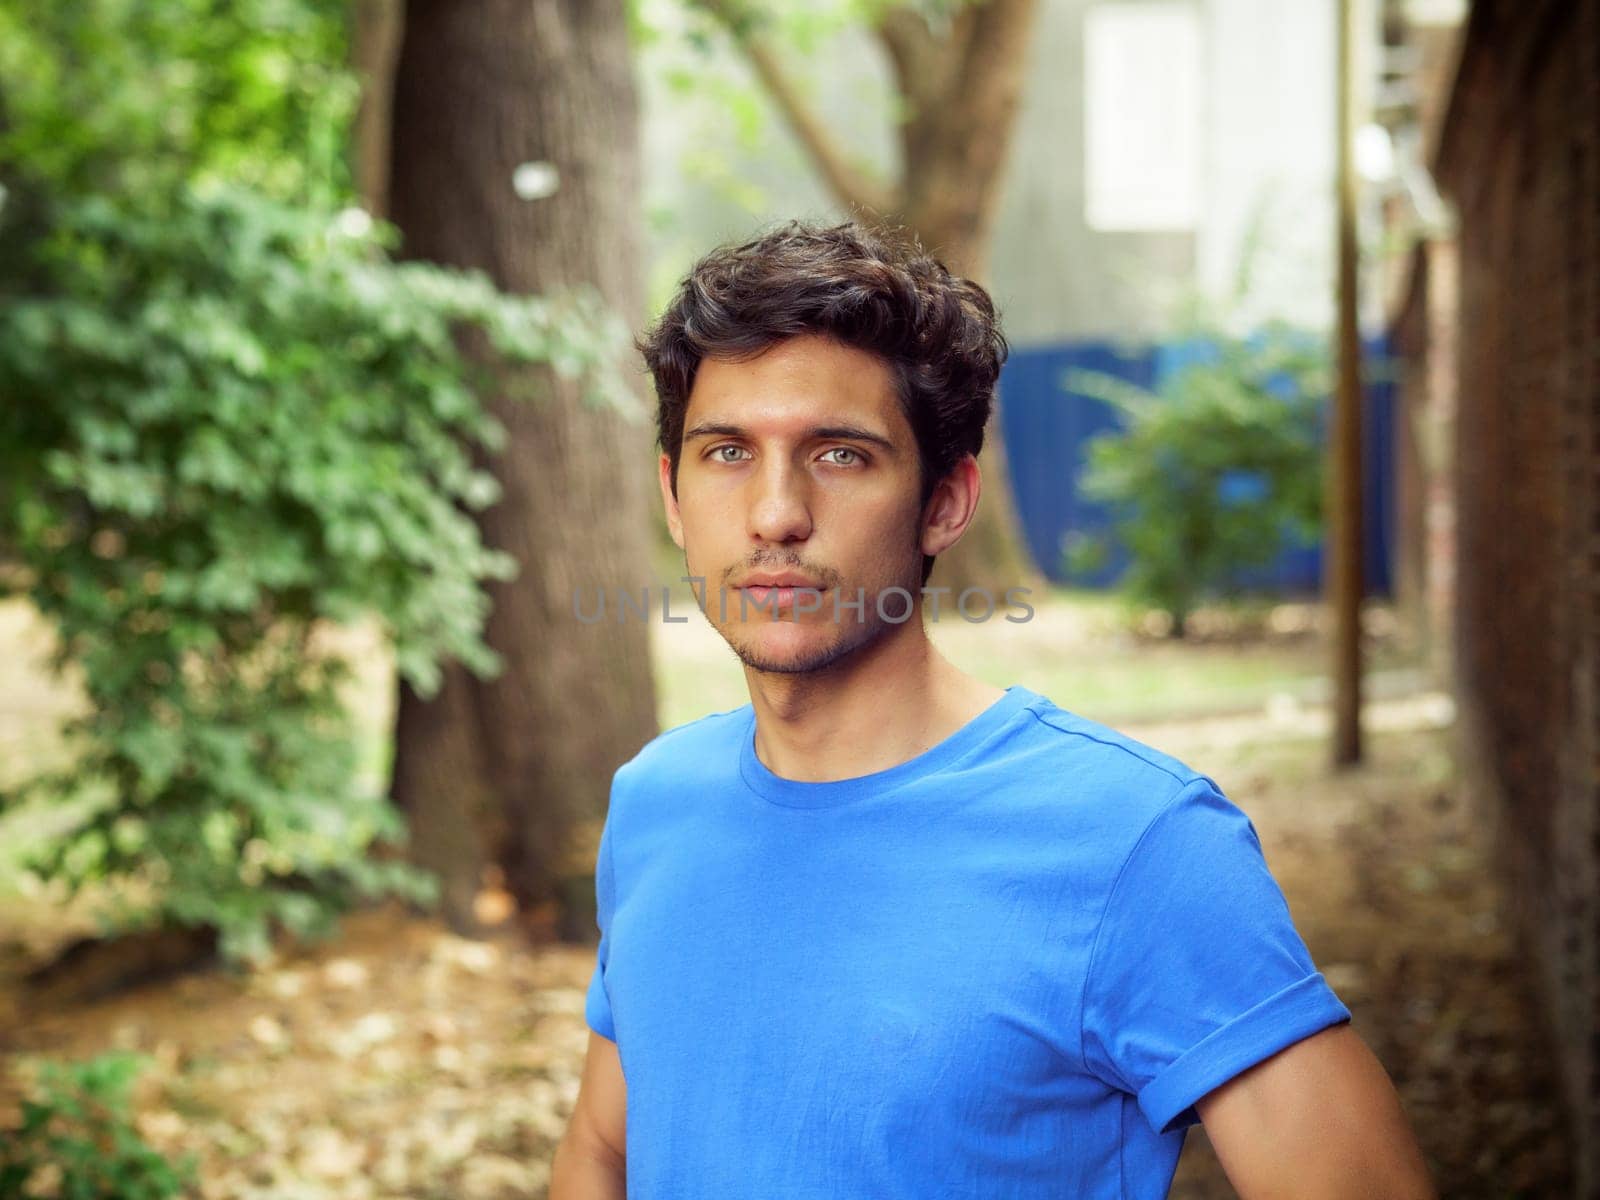 Three quarters shot of one handsome young man in urban setting wearing blue polo shirt